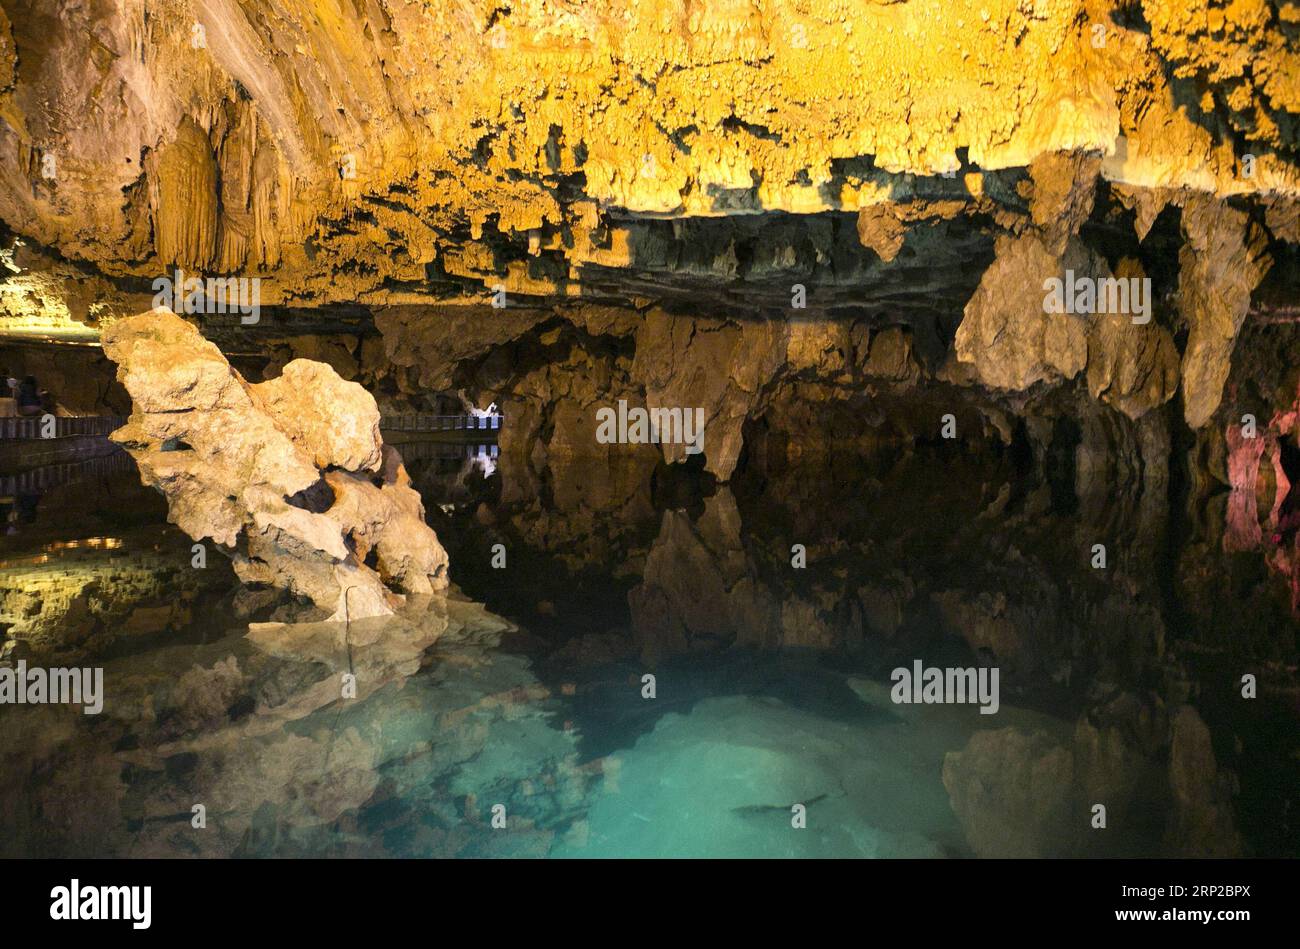 (180829) -- HAMEDAN, Aug. 29, 2018 -- Photo taken on Aug. 27, 2018 shows a view of Alisadr cave in Hamedan province, western Iran, on Aug. 27, 2018. Alisadr Cave attracts thousands of tourists every year. ) (qxy) IRAN-HAMEDAN-ALISADR CAVE AhmadxHalabisaz PUBLICATIONxNOTxINxCHN Stock Photo